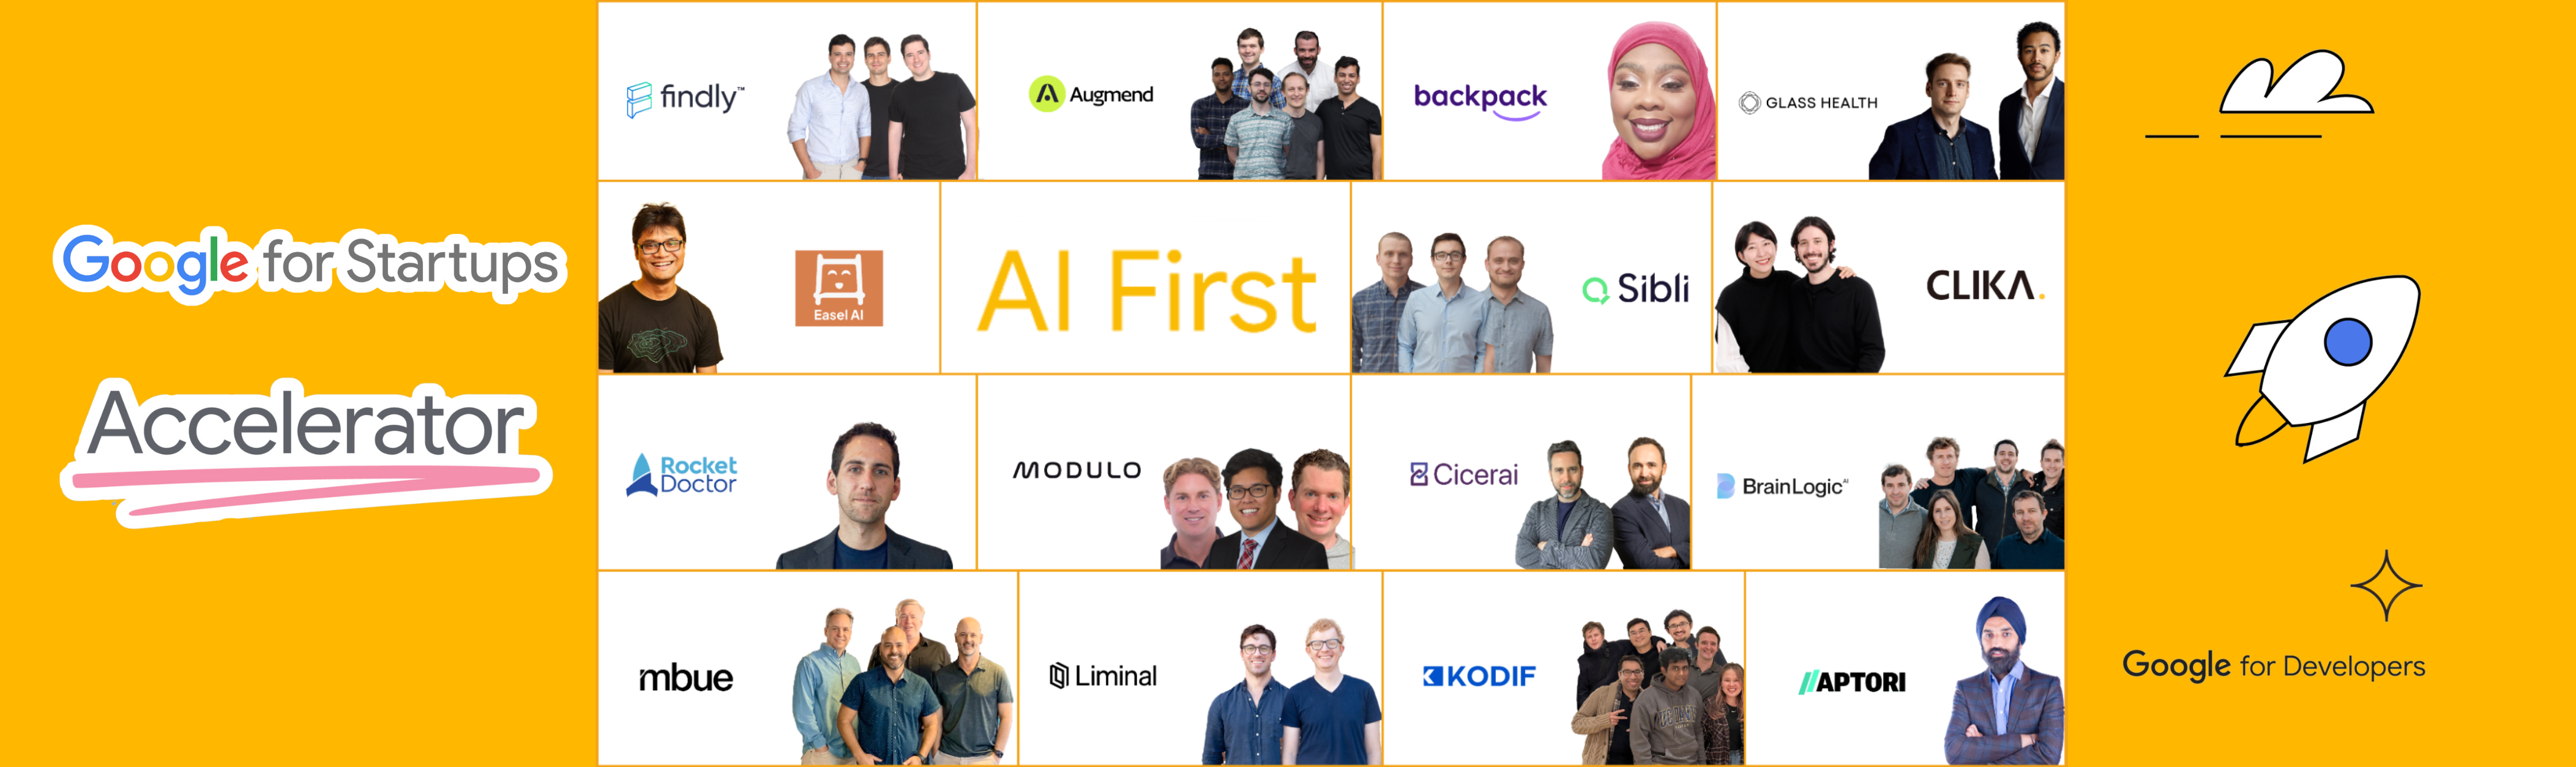 Google for Startups Accelerator: AI First Inaugural Class - banner